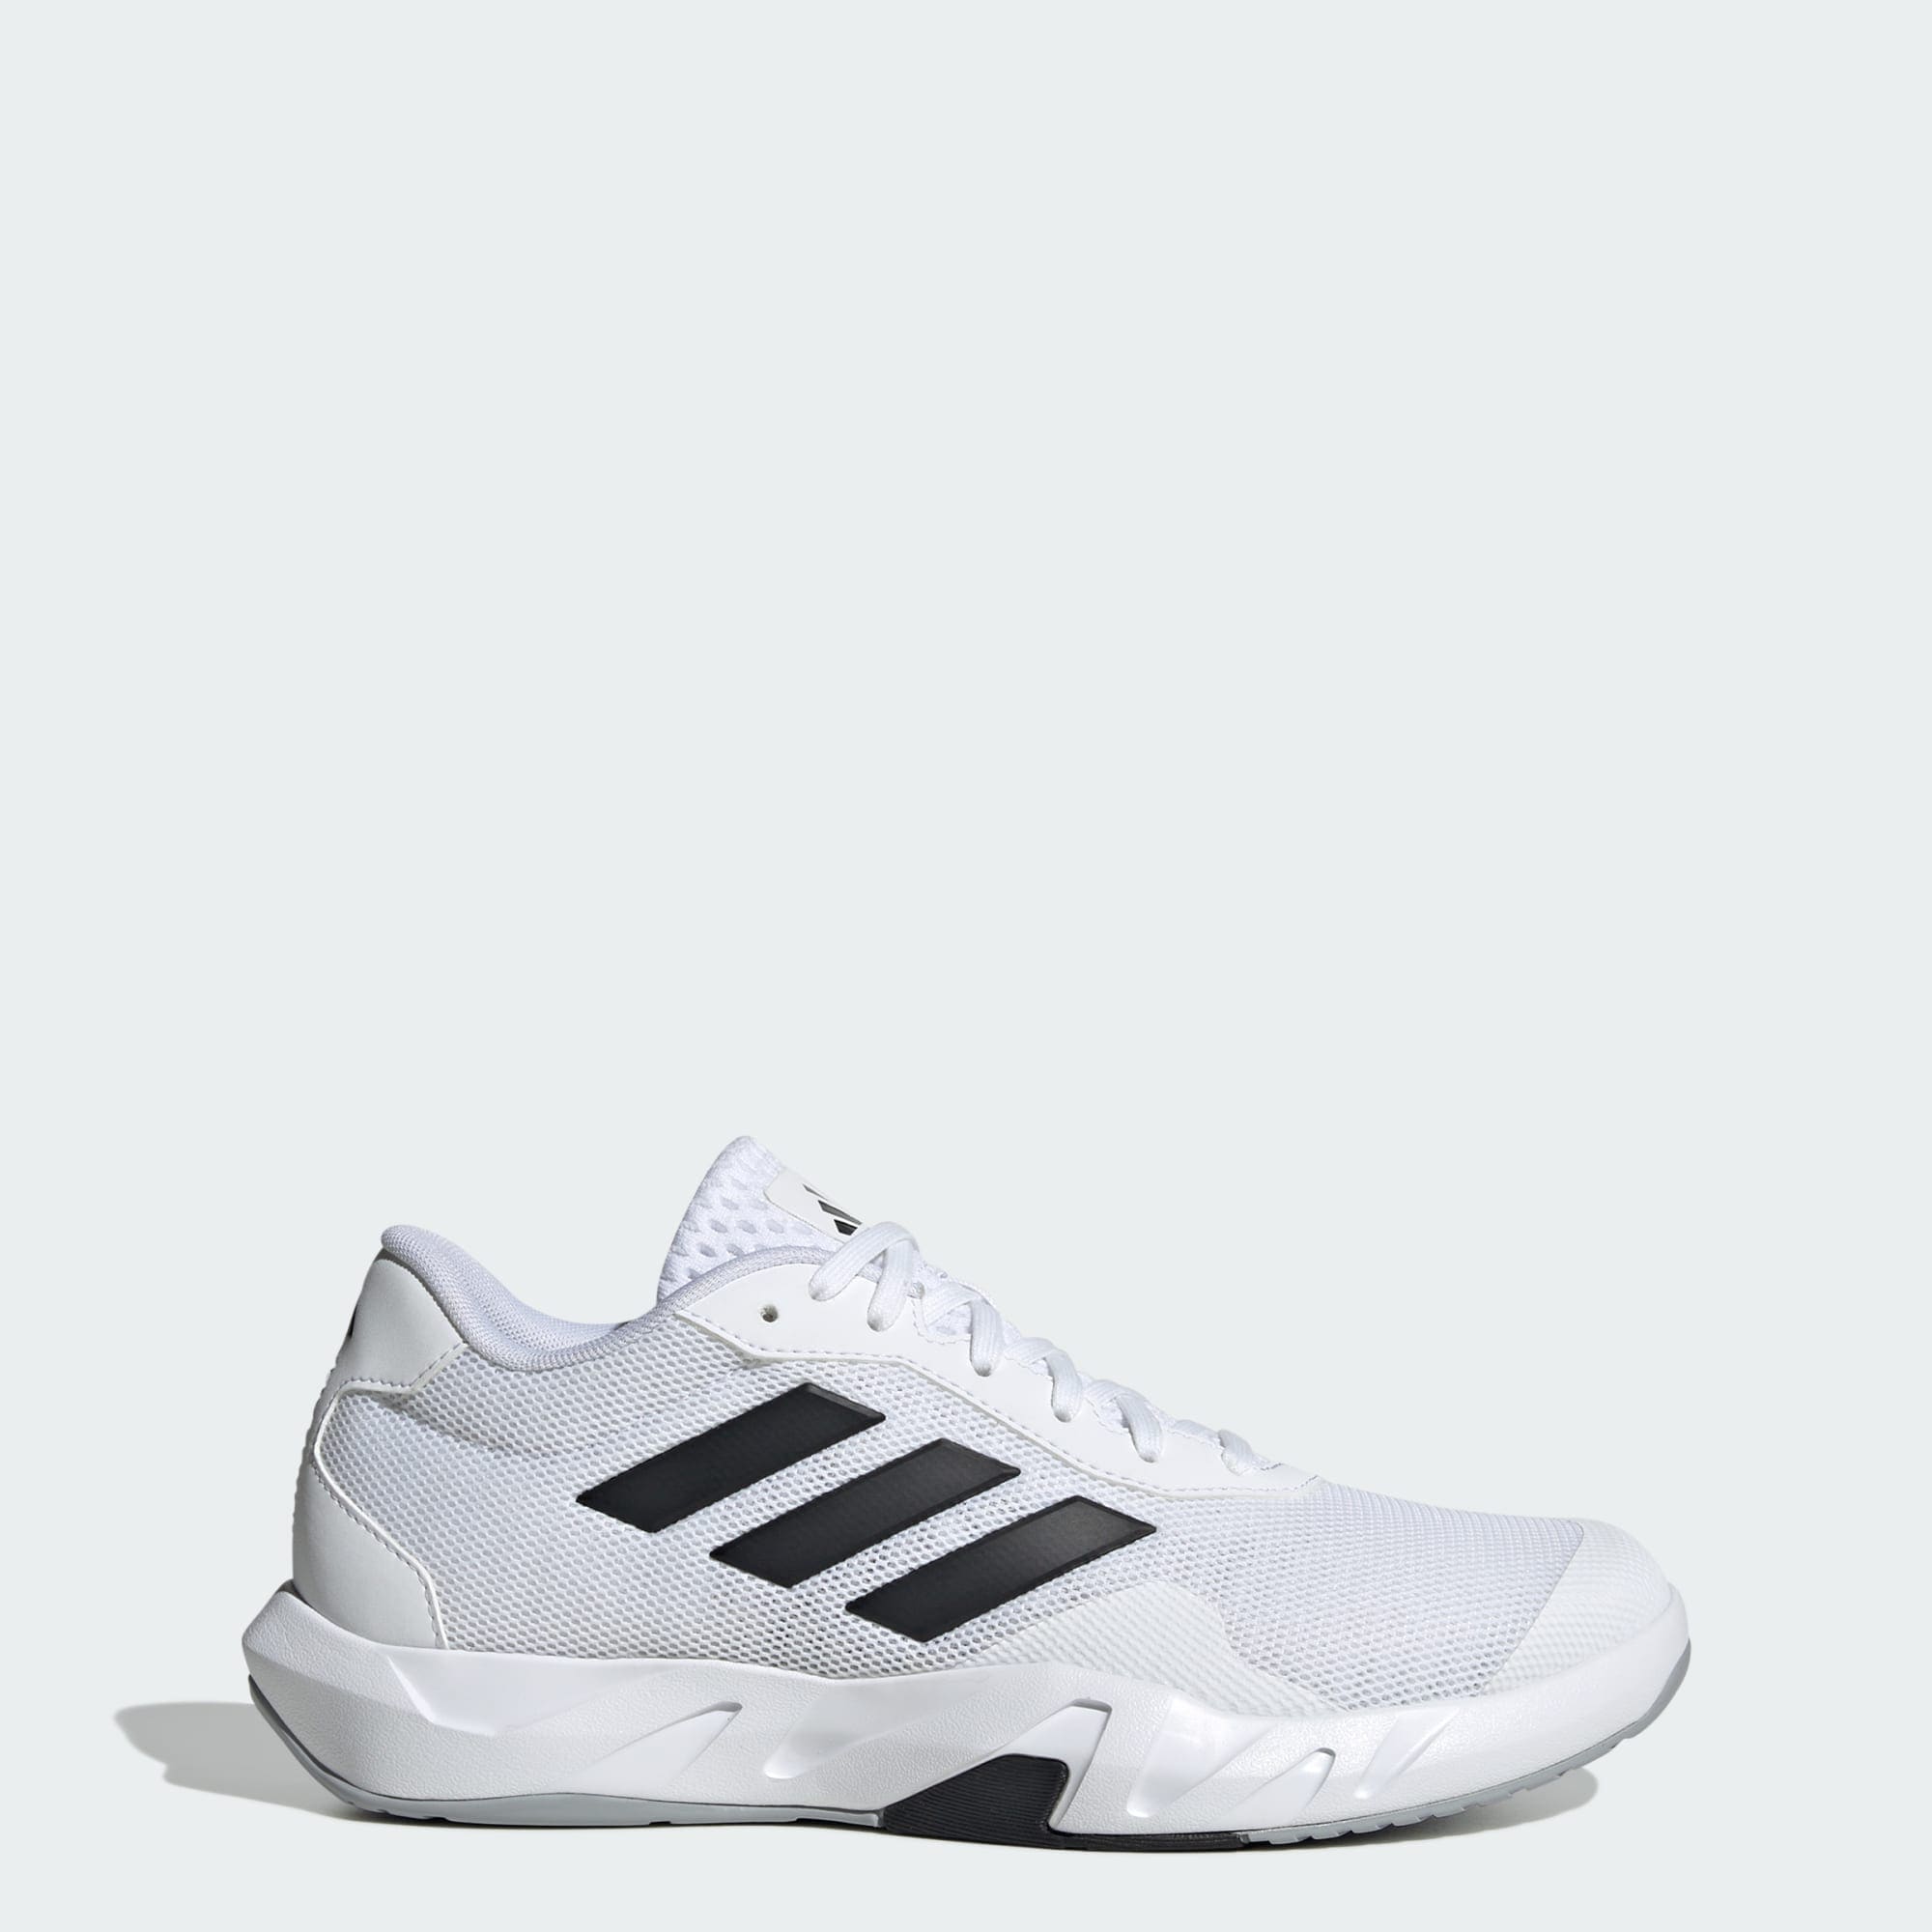 adidas Men Amplimove Trainer Shoes - Mens Shoes | Pro:Direct Running